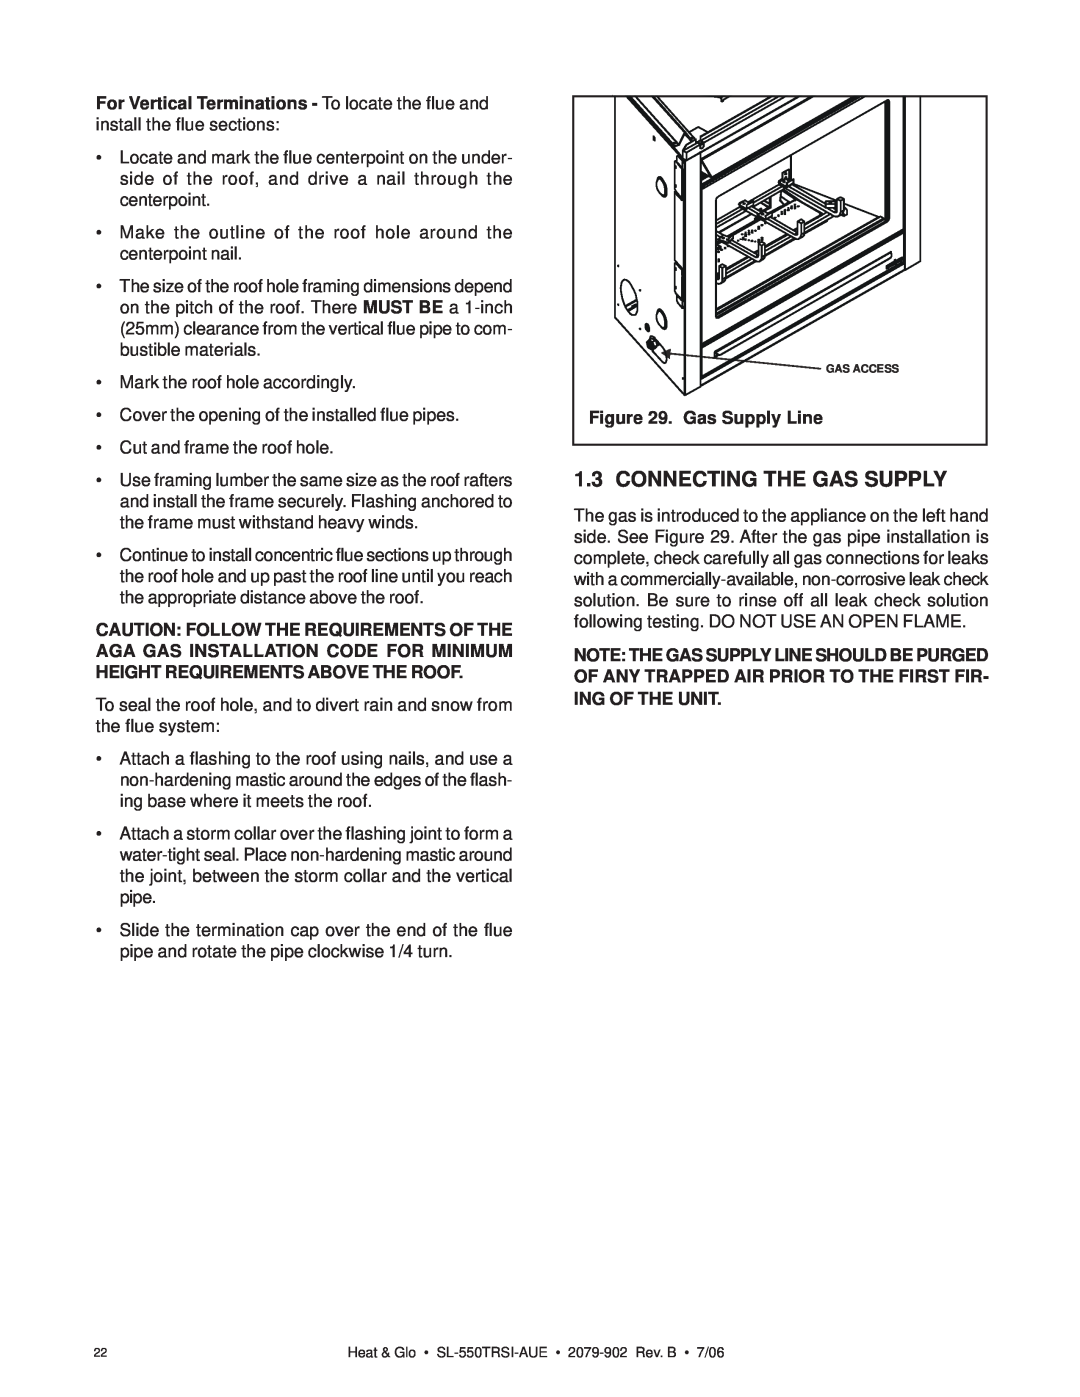 Hearth and Home Technologies SL-550TRSI-AUE manual Connecting The Gas Supply, Gas Supply Line 